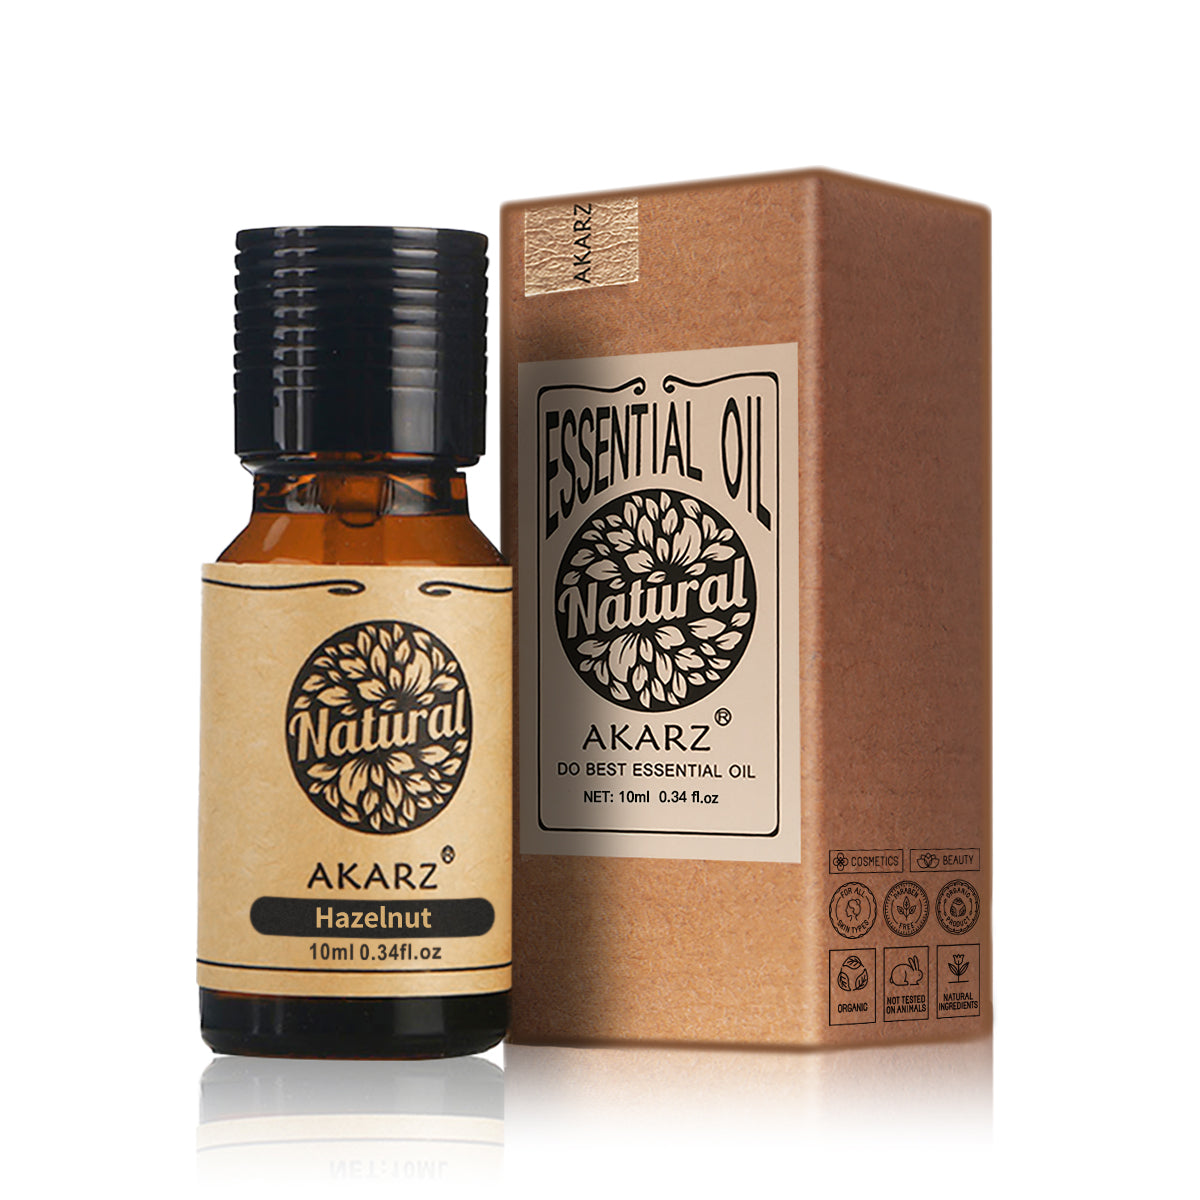 AKARZ Natural Aromatherapy Hazelnut Oil - Skin Repair and Elasticity - Promotes Regeneration - Imported from France